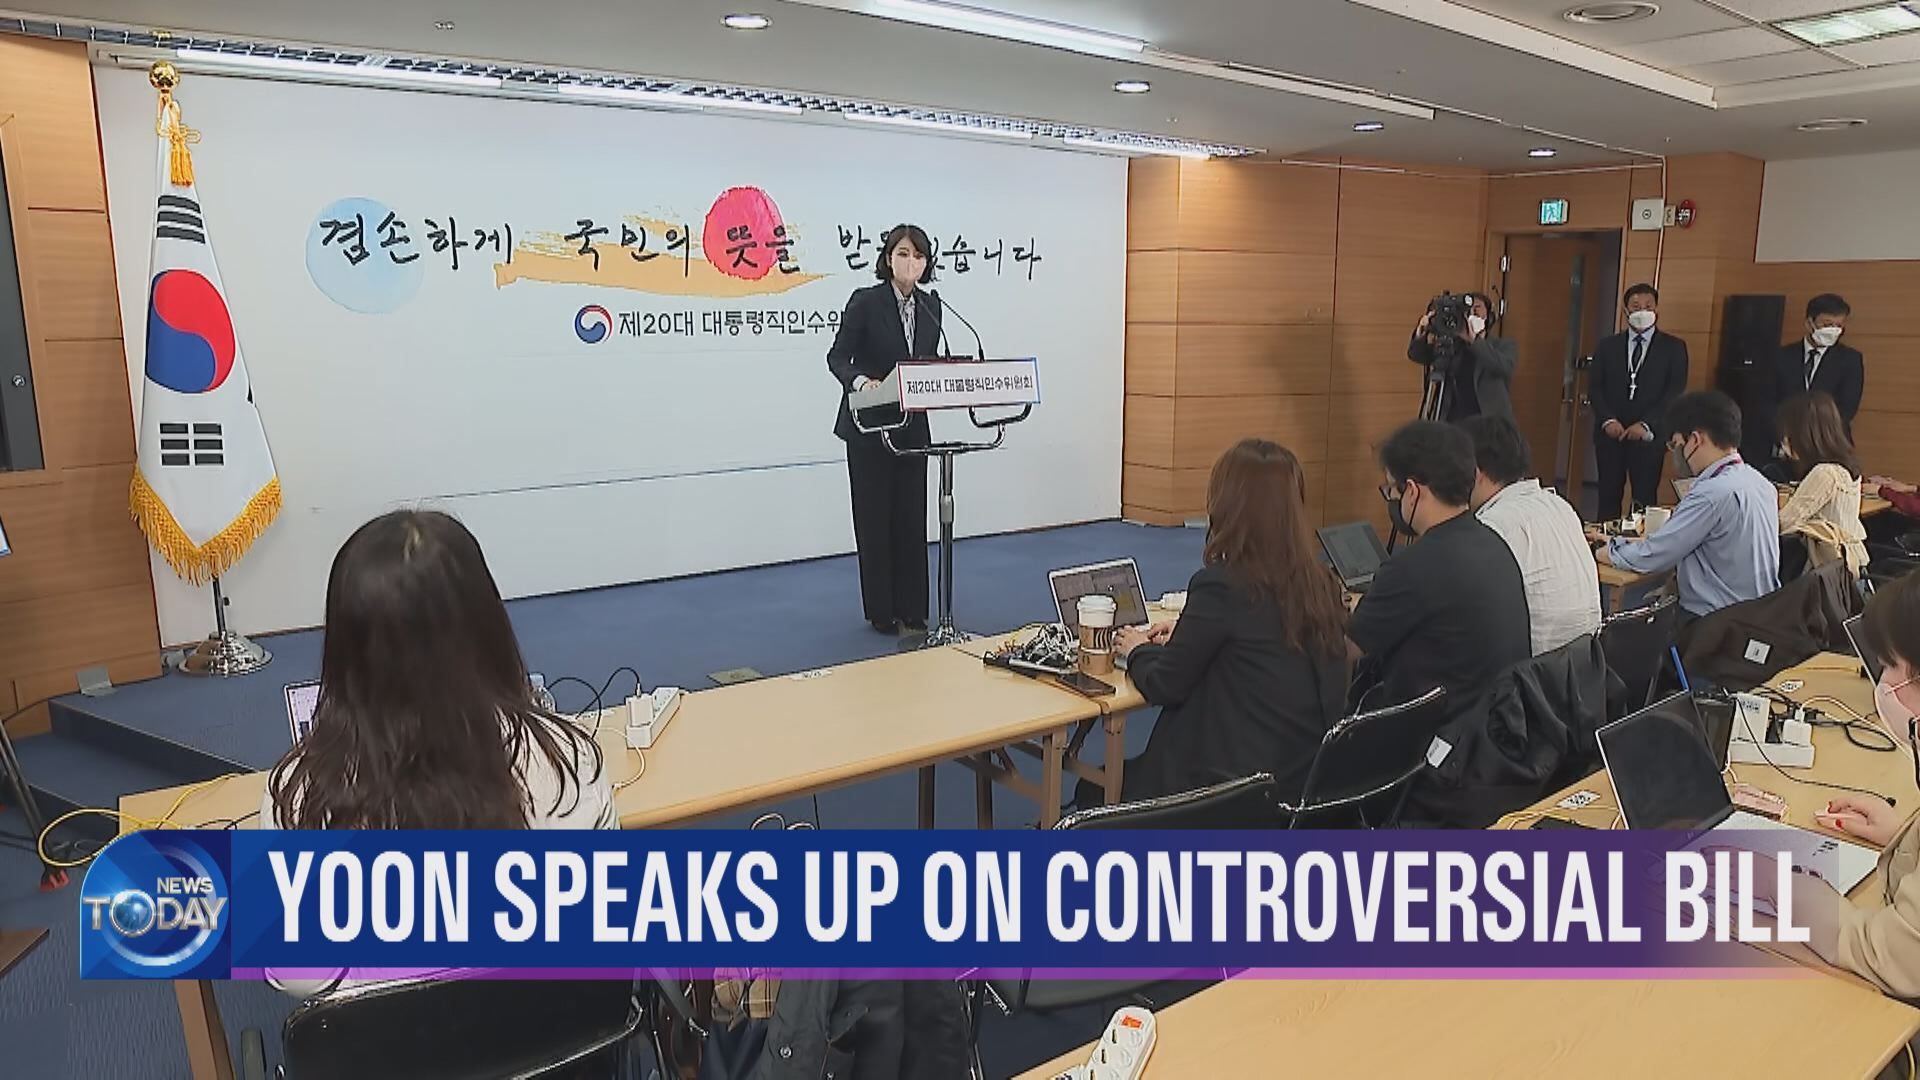 YOON SPEAKS UP ON CONTROVERSIAL BILL